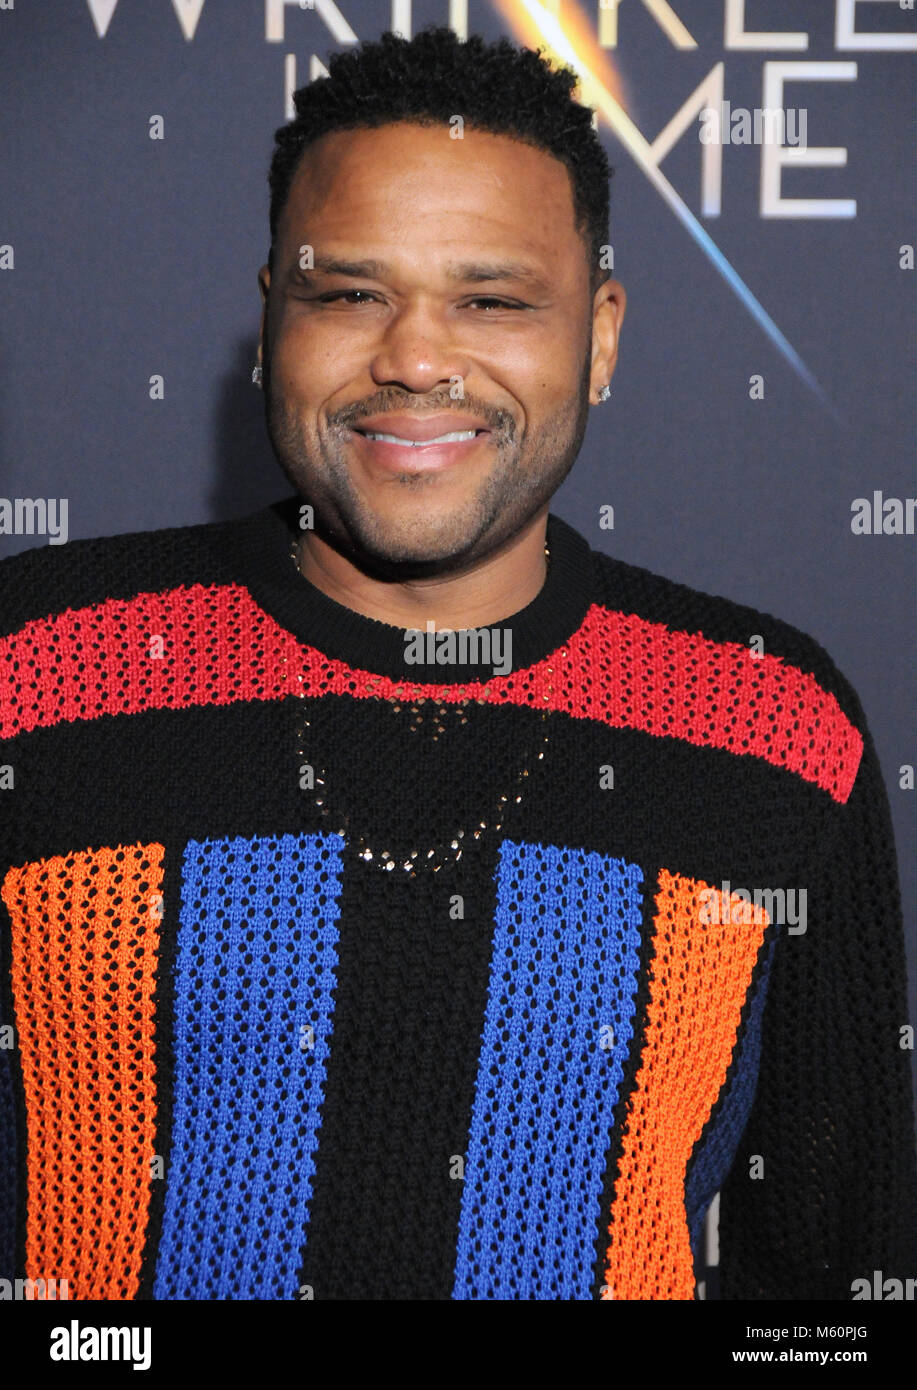 Los Angeles, USA. 26th Feb, 2018. Actor Anthony Anderson attends the World Premiere of Disney's' 'A Wrinkle In Time' at the El Capitan Theatre on February 26, 2018 in Los Angeles, California. Photo by Barry King/Alamy Live News Stock Photo